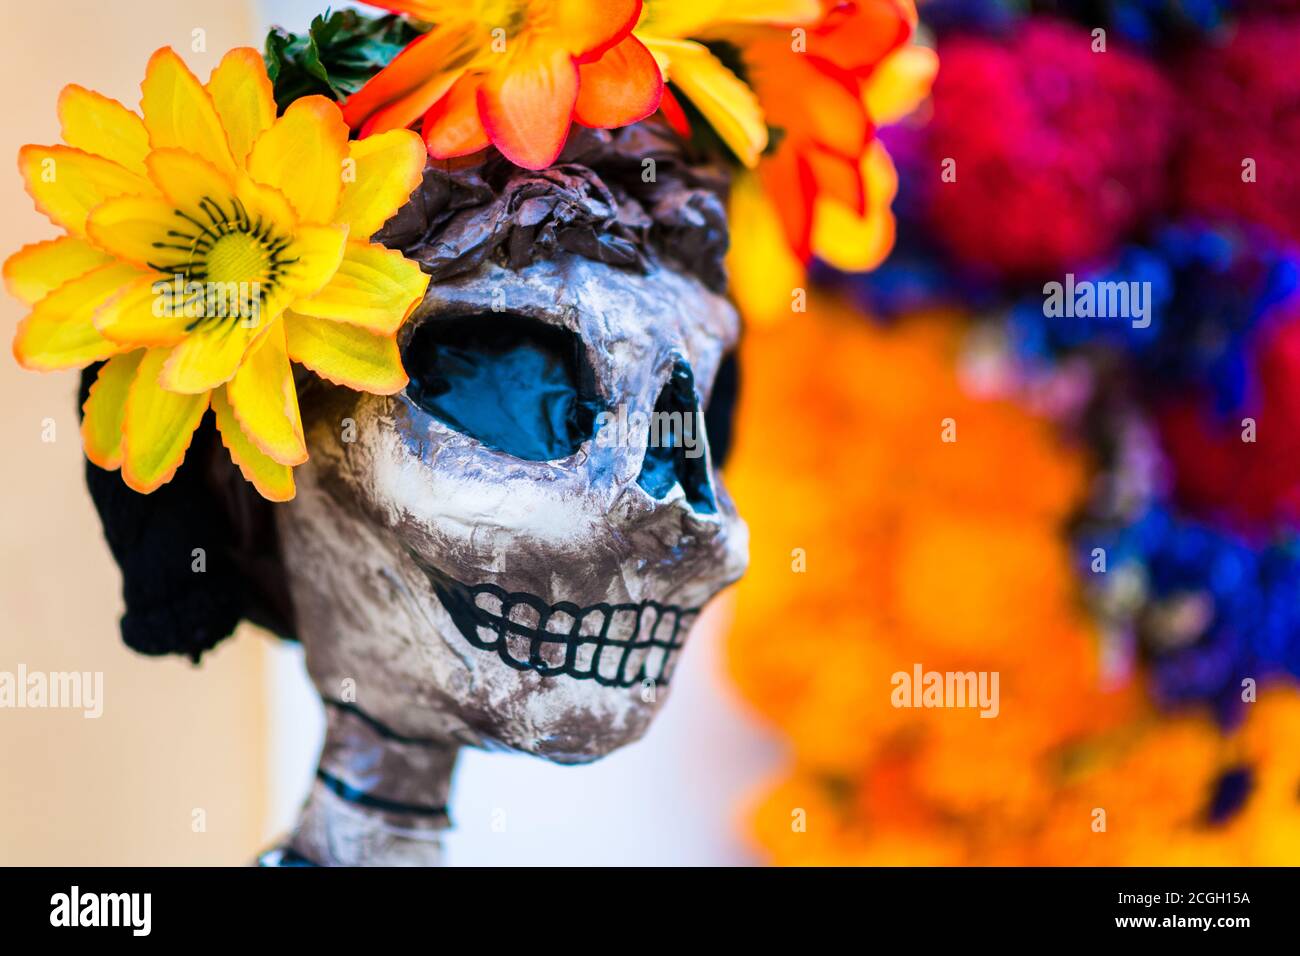 A flower-decorated skeleton figure is seen placed in the street during the Day of the Dead celebrations in Oaxaca, Mexico. Stock Photo